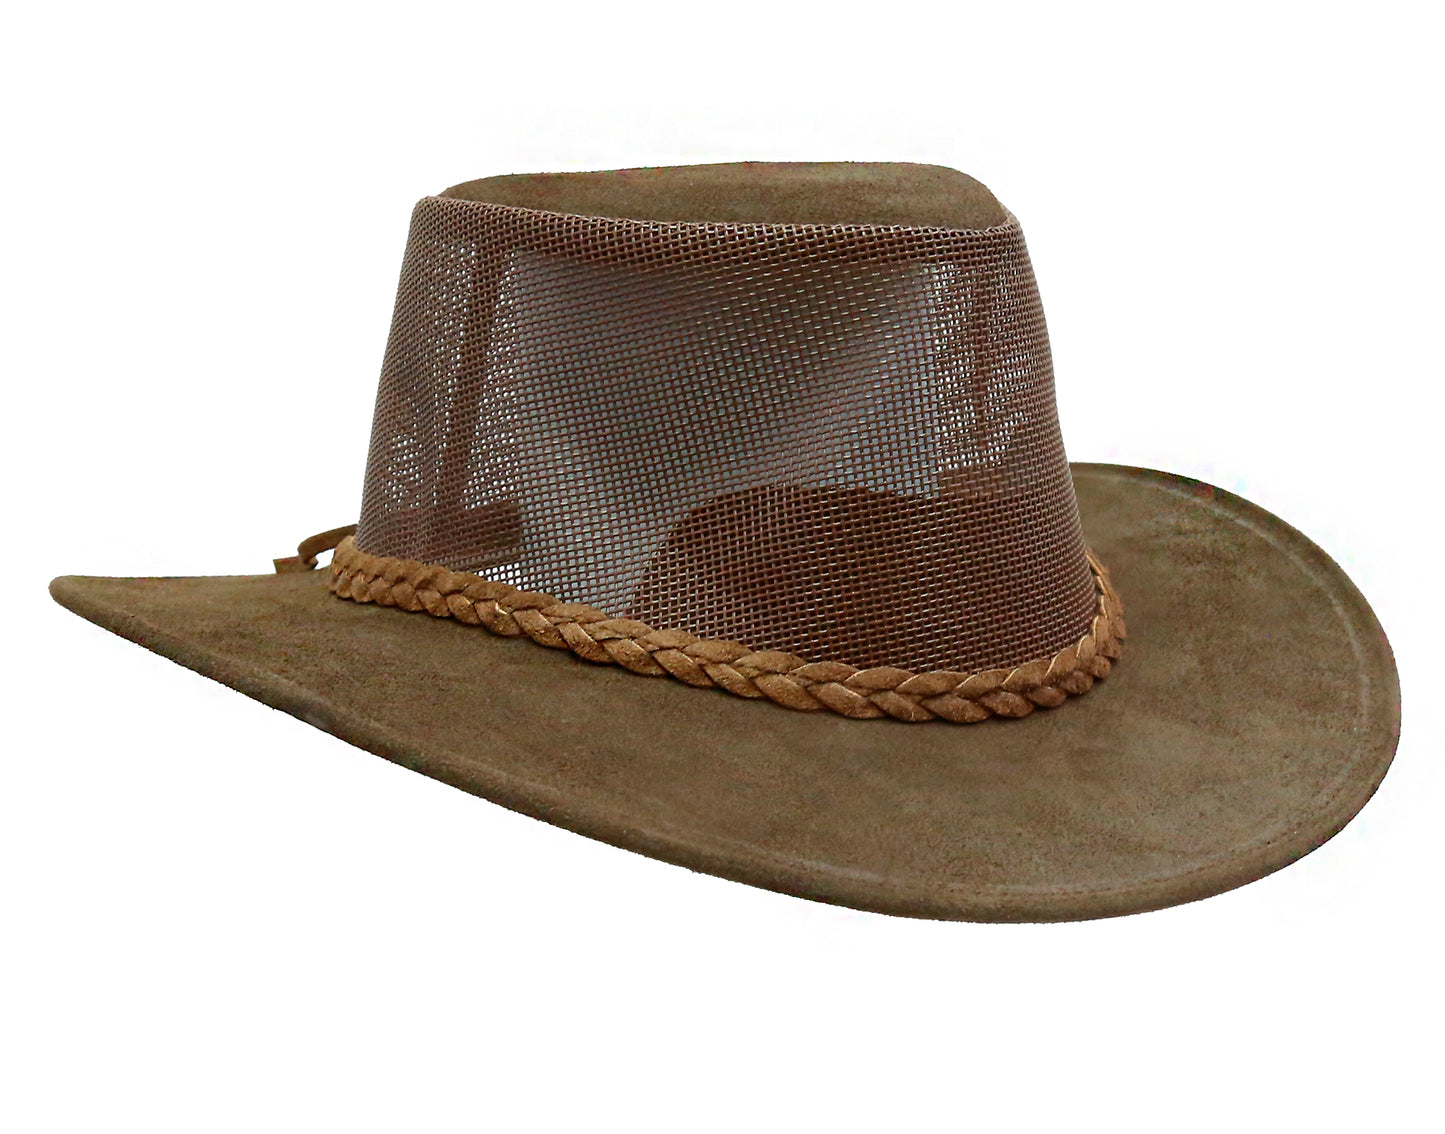 Cowboy hat for women and men from network and leather sun protection for the head and face